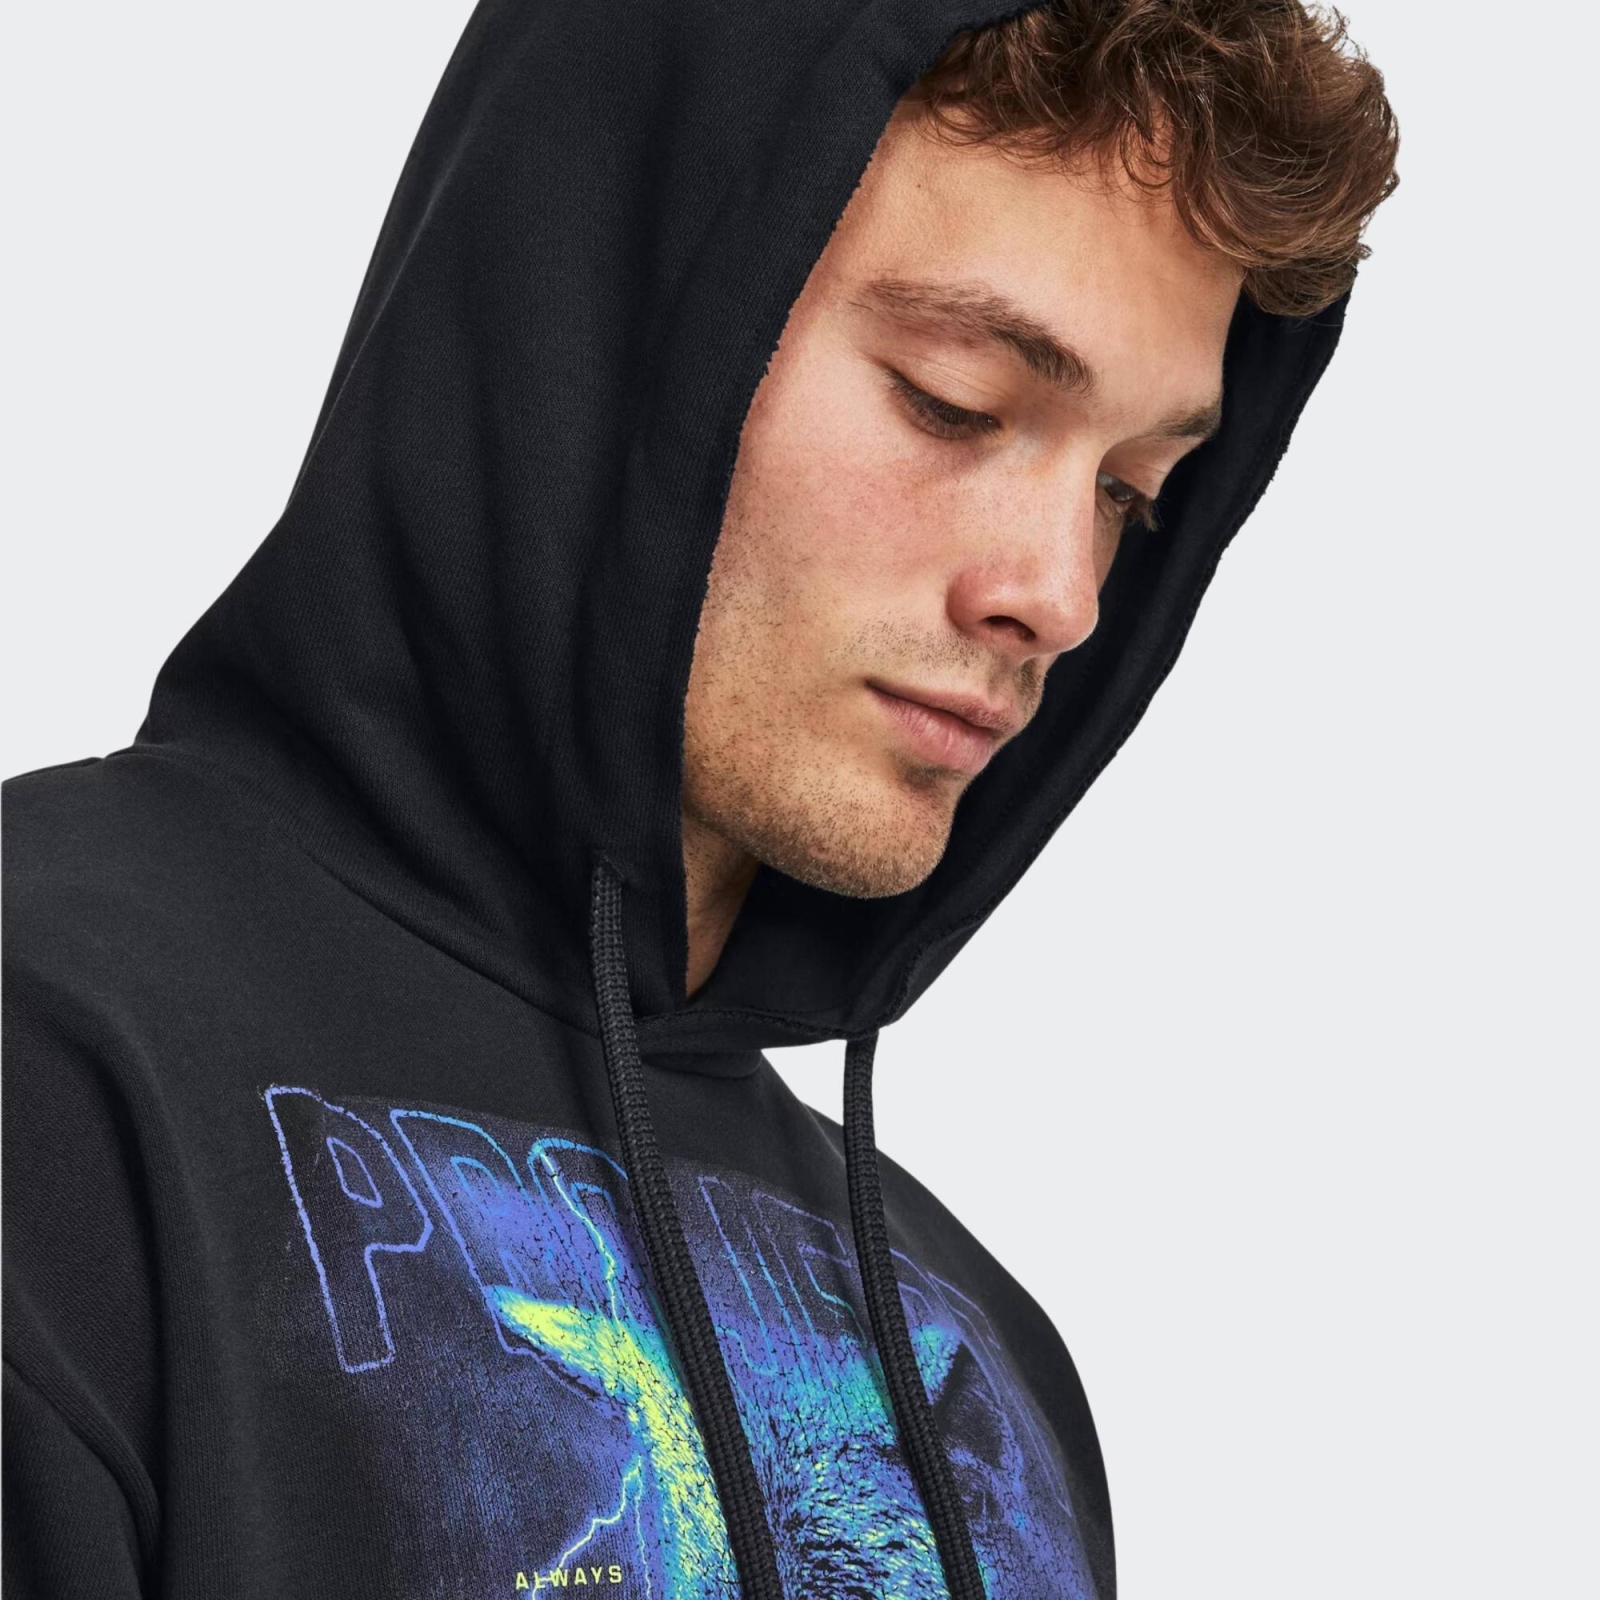 UNDER ARMOUR PROJECT ROCK HWT TERRY HOODIE